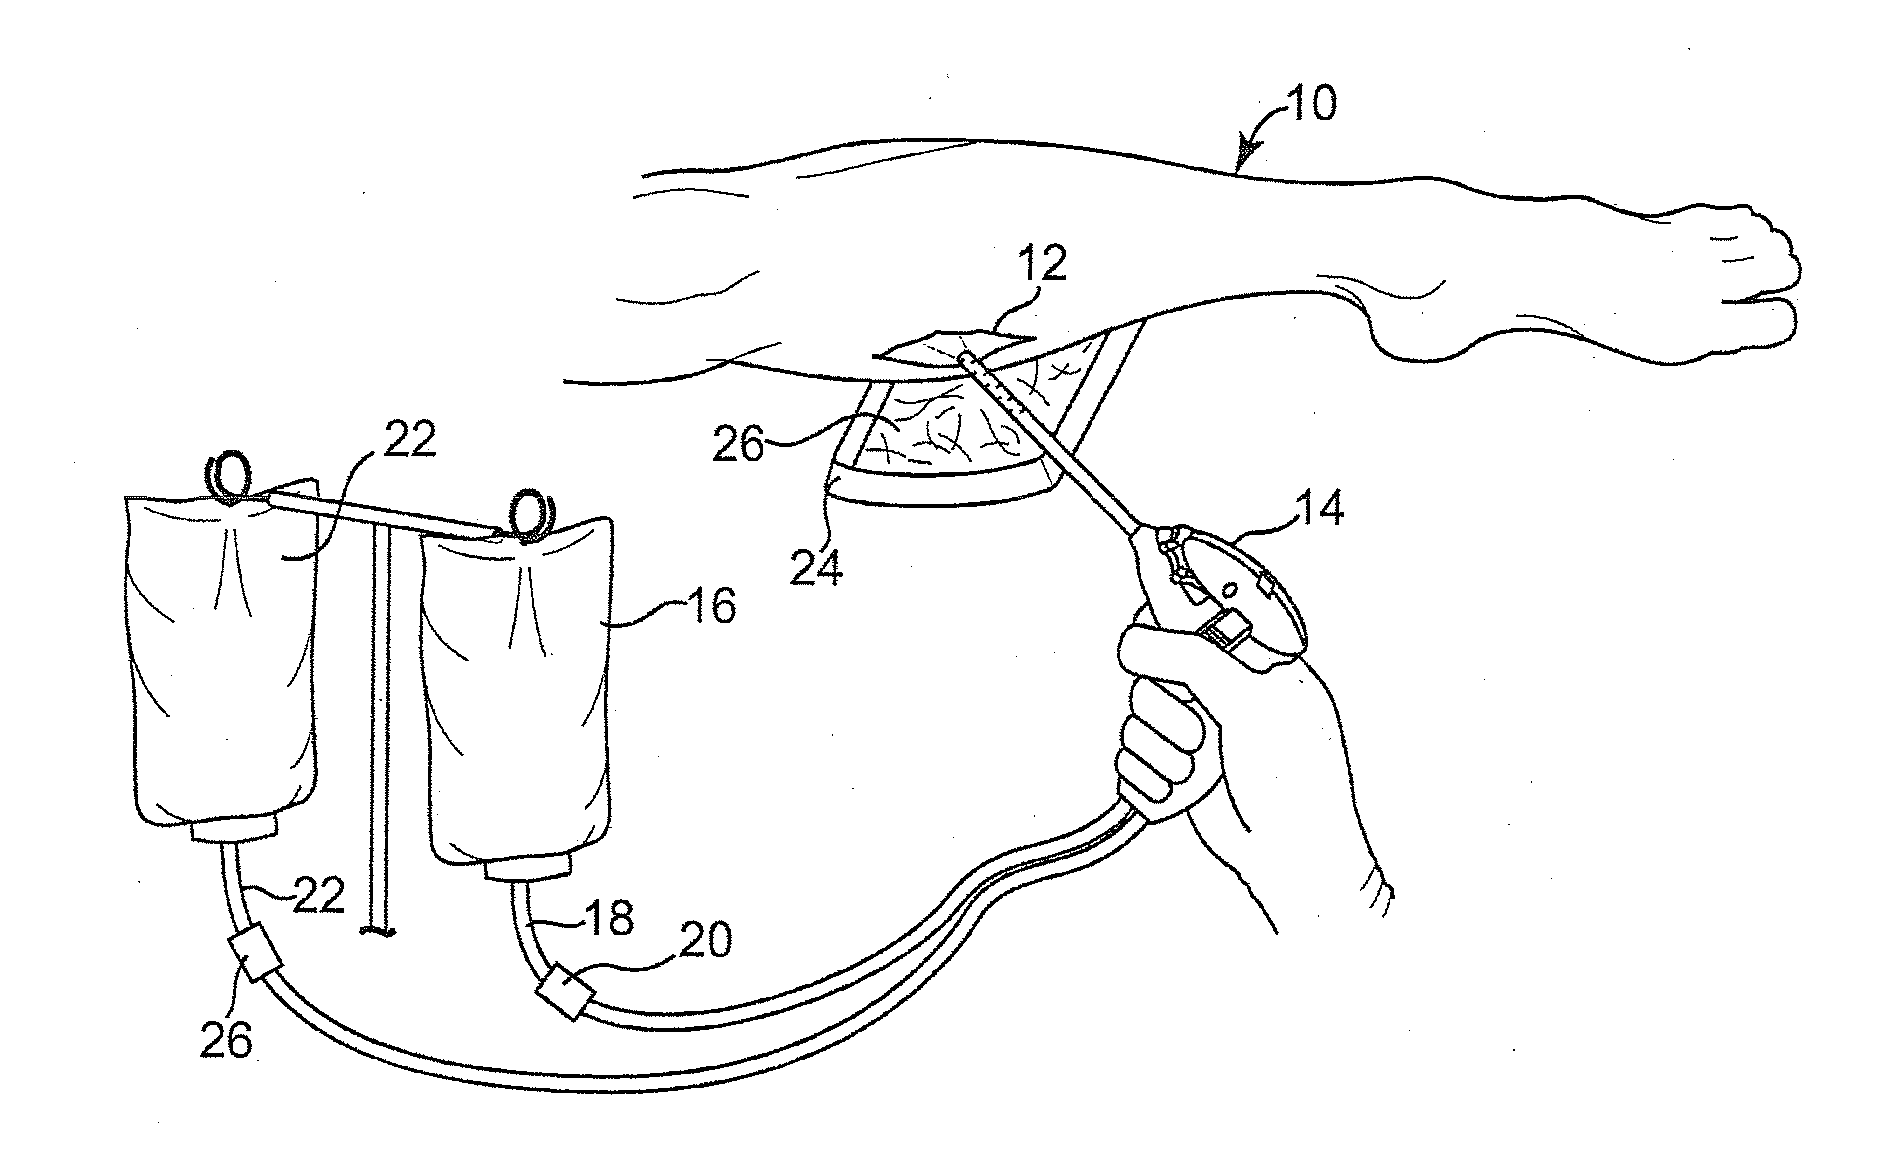 Method for treating chronic wounds with an extracellular polymeric substance solvating system